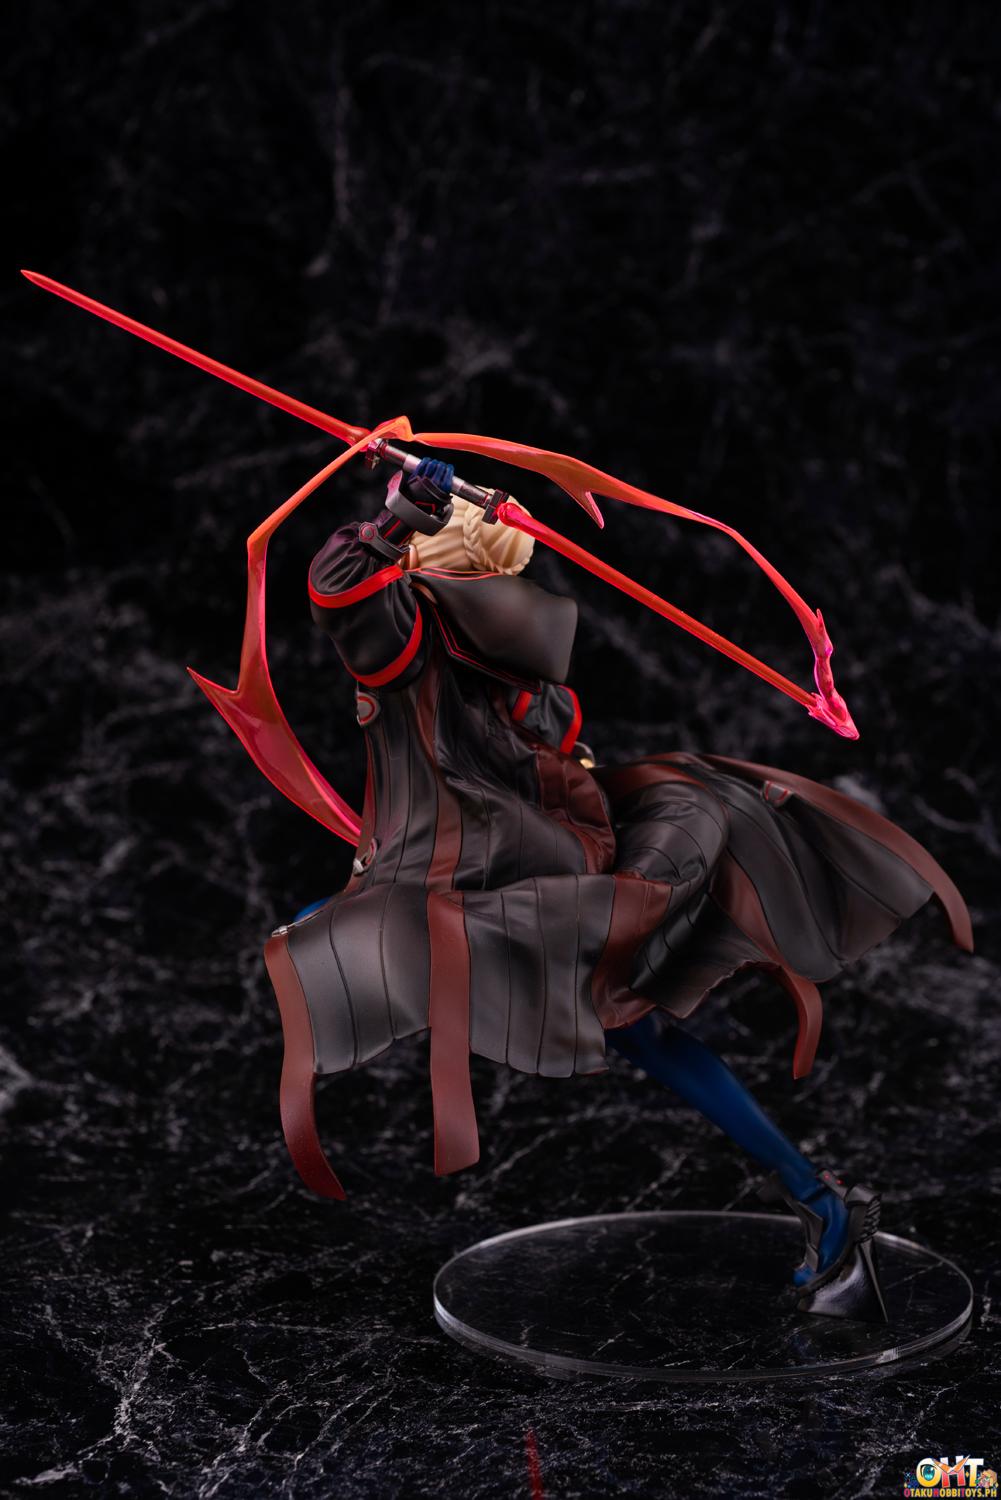 [REISSUE] Funny Knights Fate/Grand Order 1/7 Mysterious Heroine X Alter